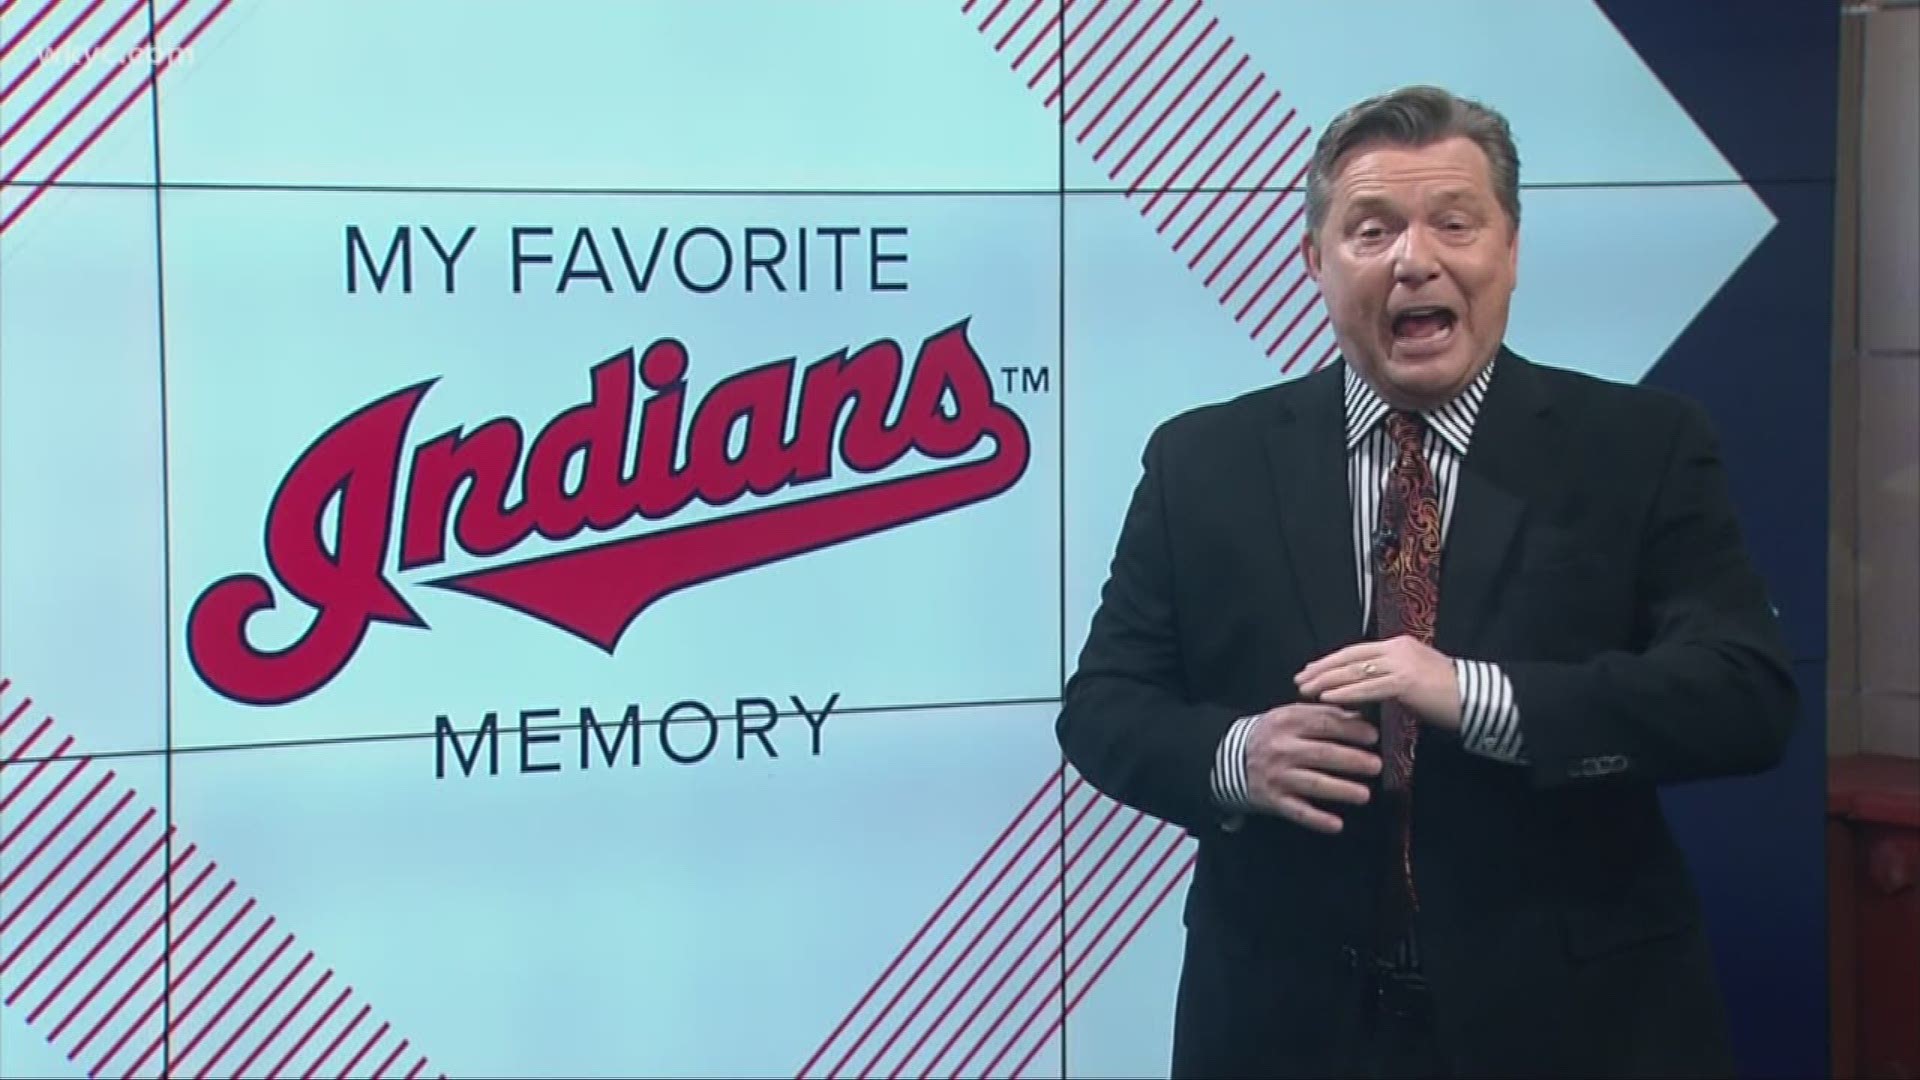 'It was such a big night, we stayed on the air until 2 a.m.' That's how WKYC's Jim Donovan remembers his favorite Cleveland Indians moment dating back to 1995.